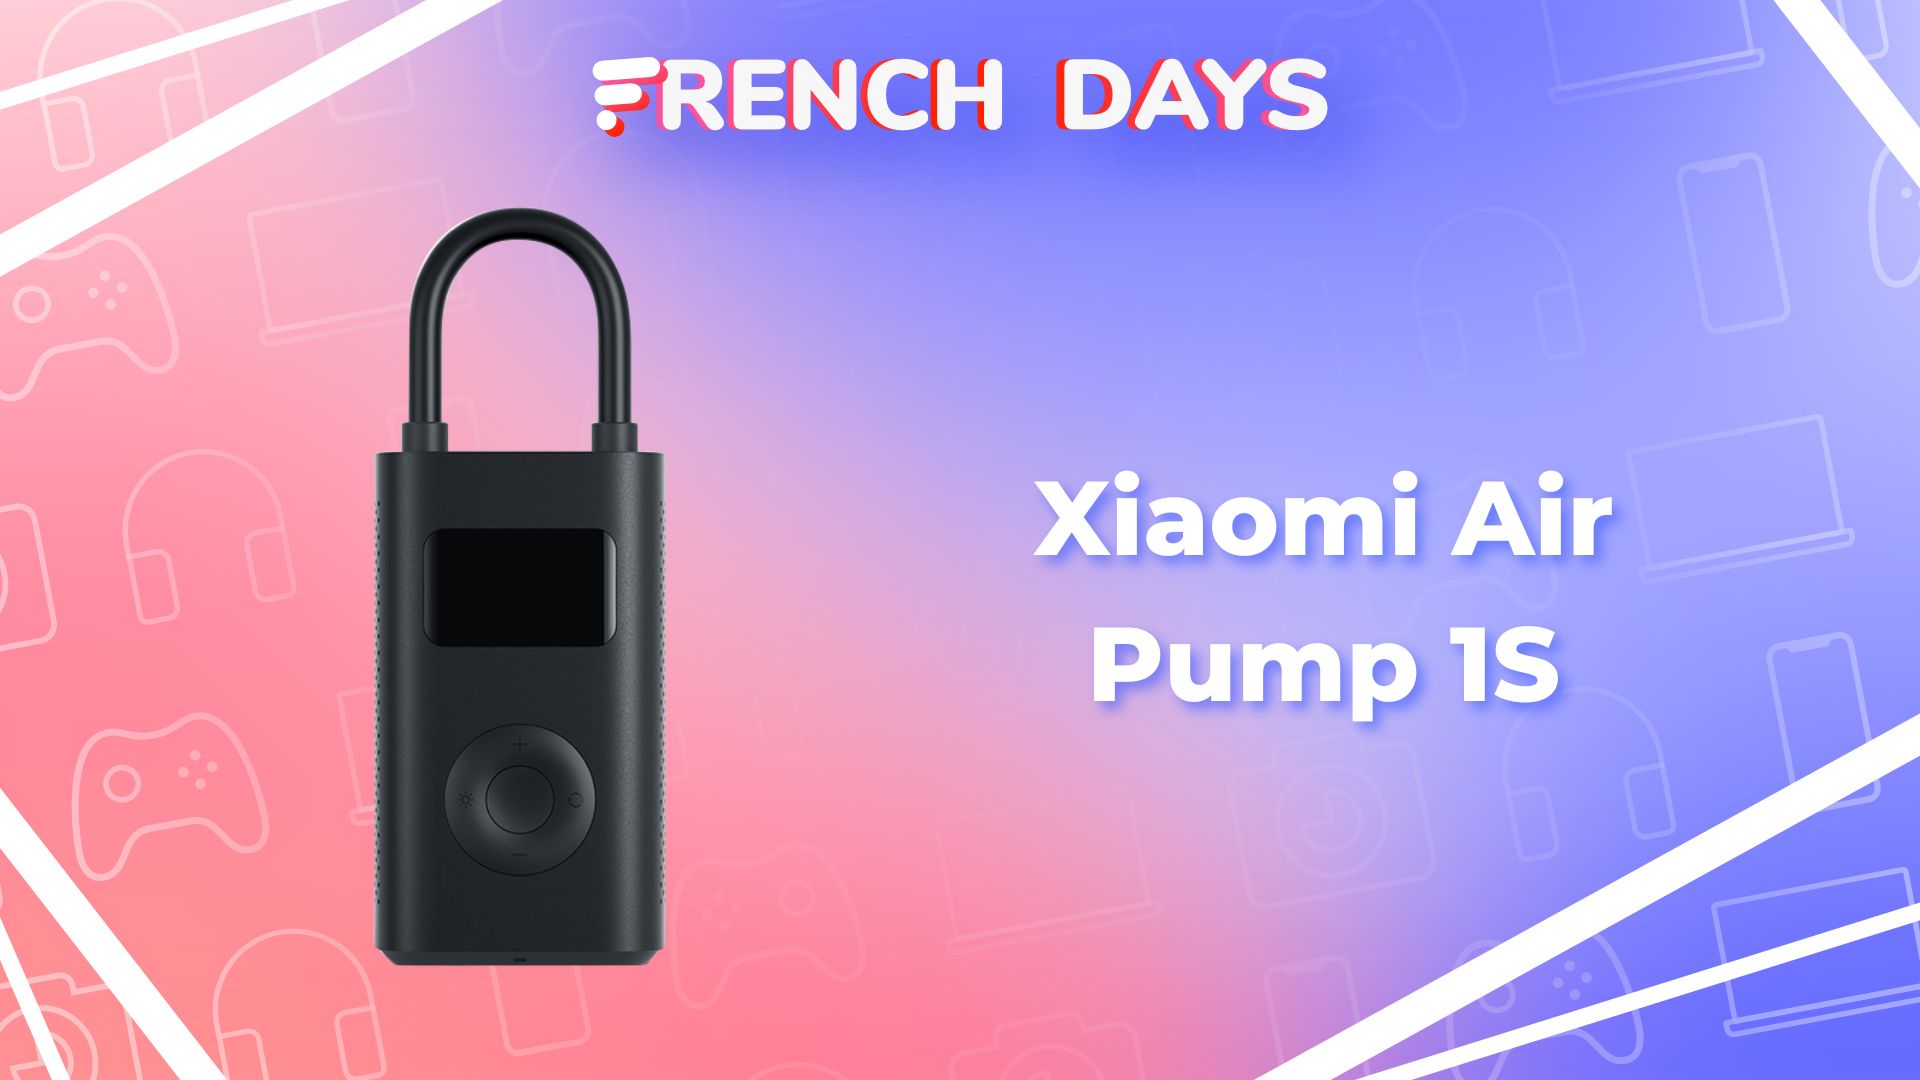 https://images.frandroid.com/wp-content/uploads/2023/05/xiaomi-air-pump-1s-french-days-2023.jpg